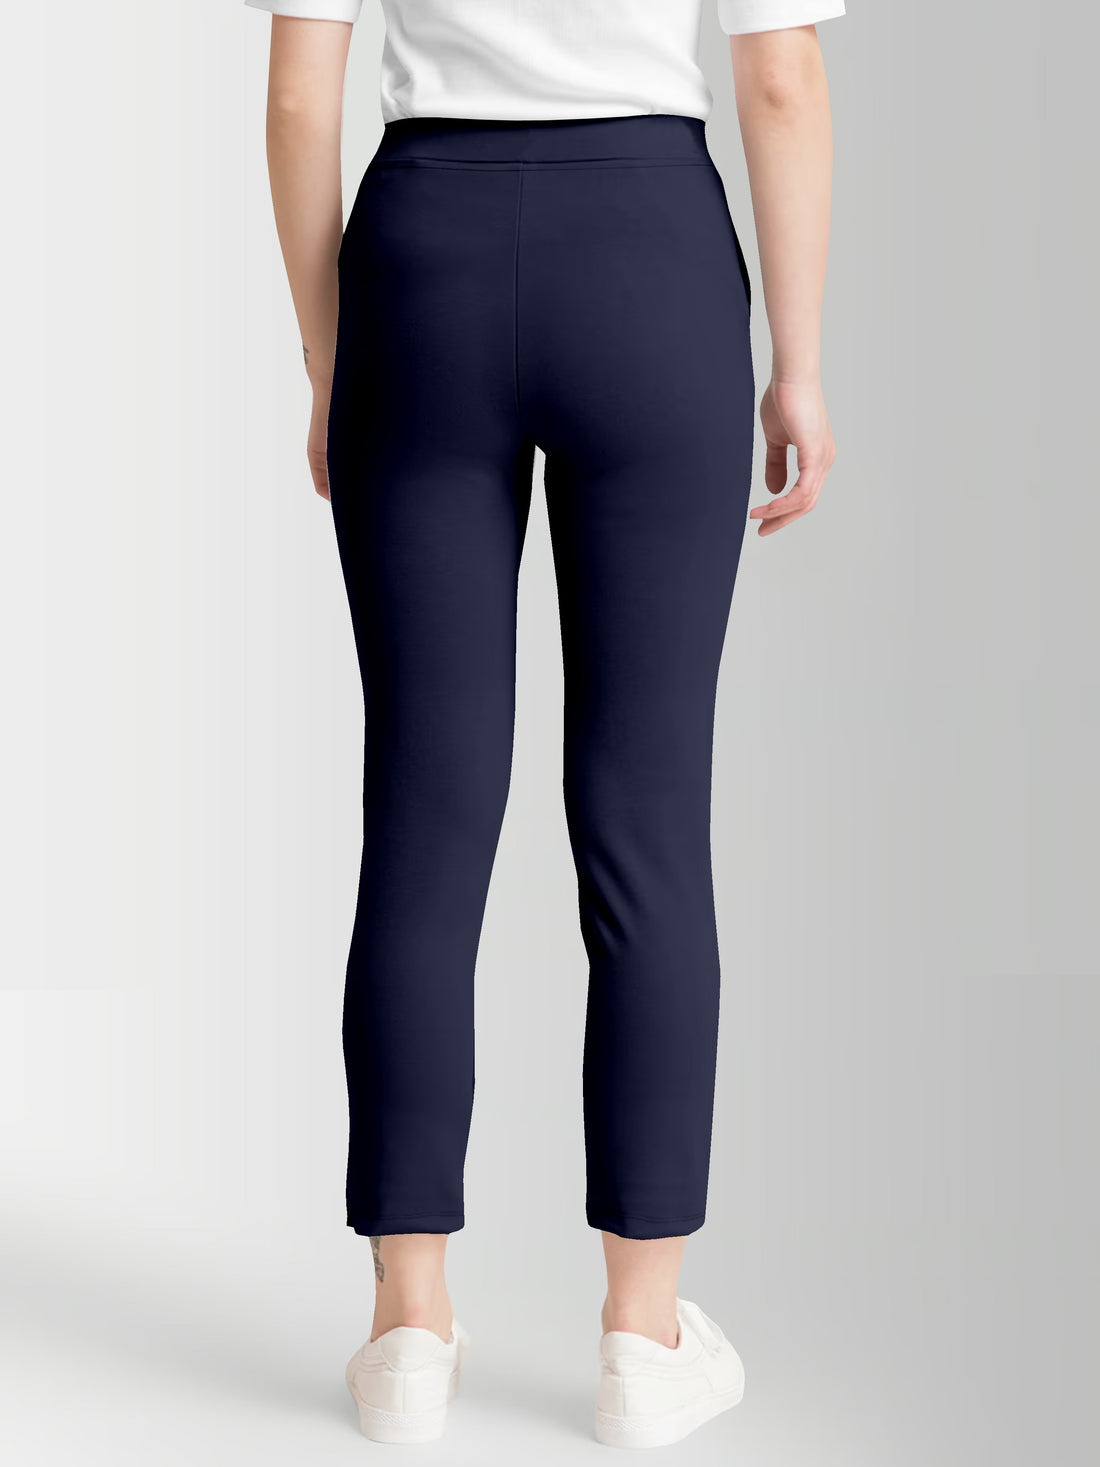 Women's Blue Skinny Fit High Rise Clean Look Regular Length Stretchable Trouser.Track Pant.Jogger.Pant.Body Fit Pent.Formal Trouser.